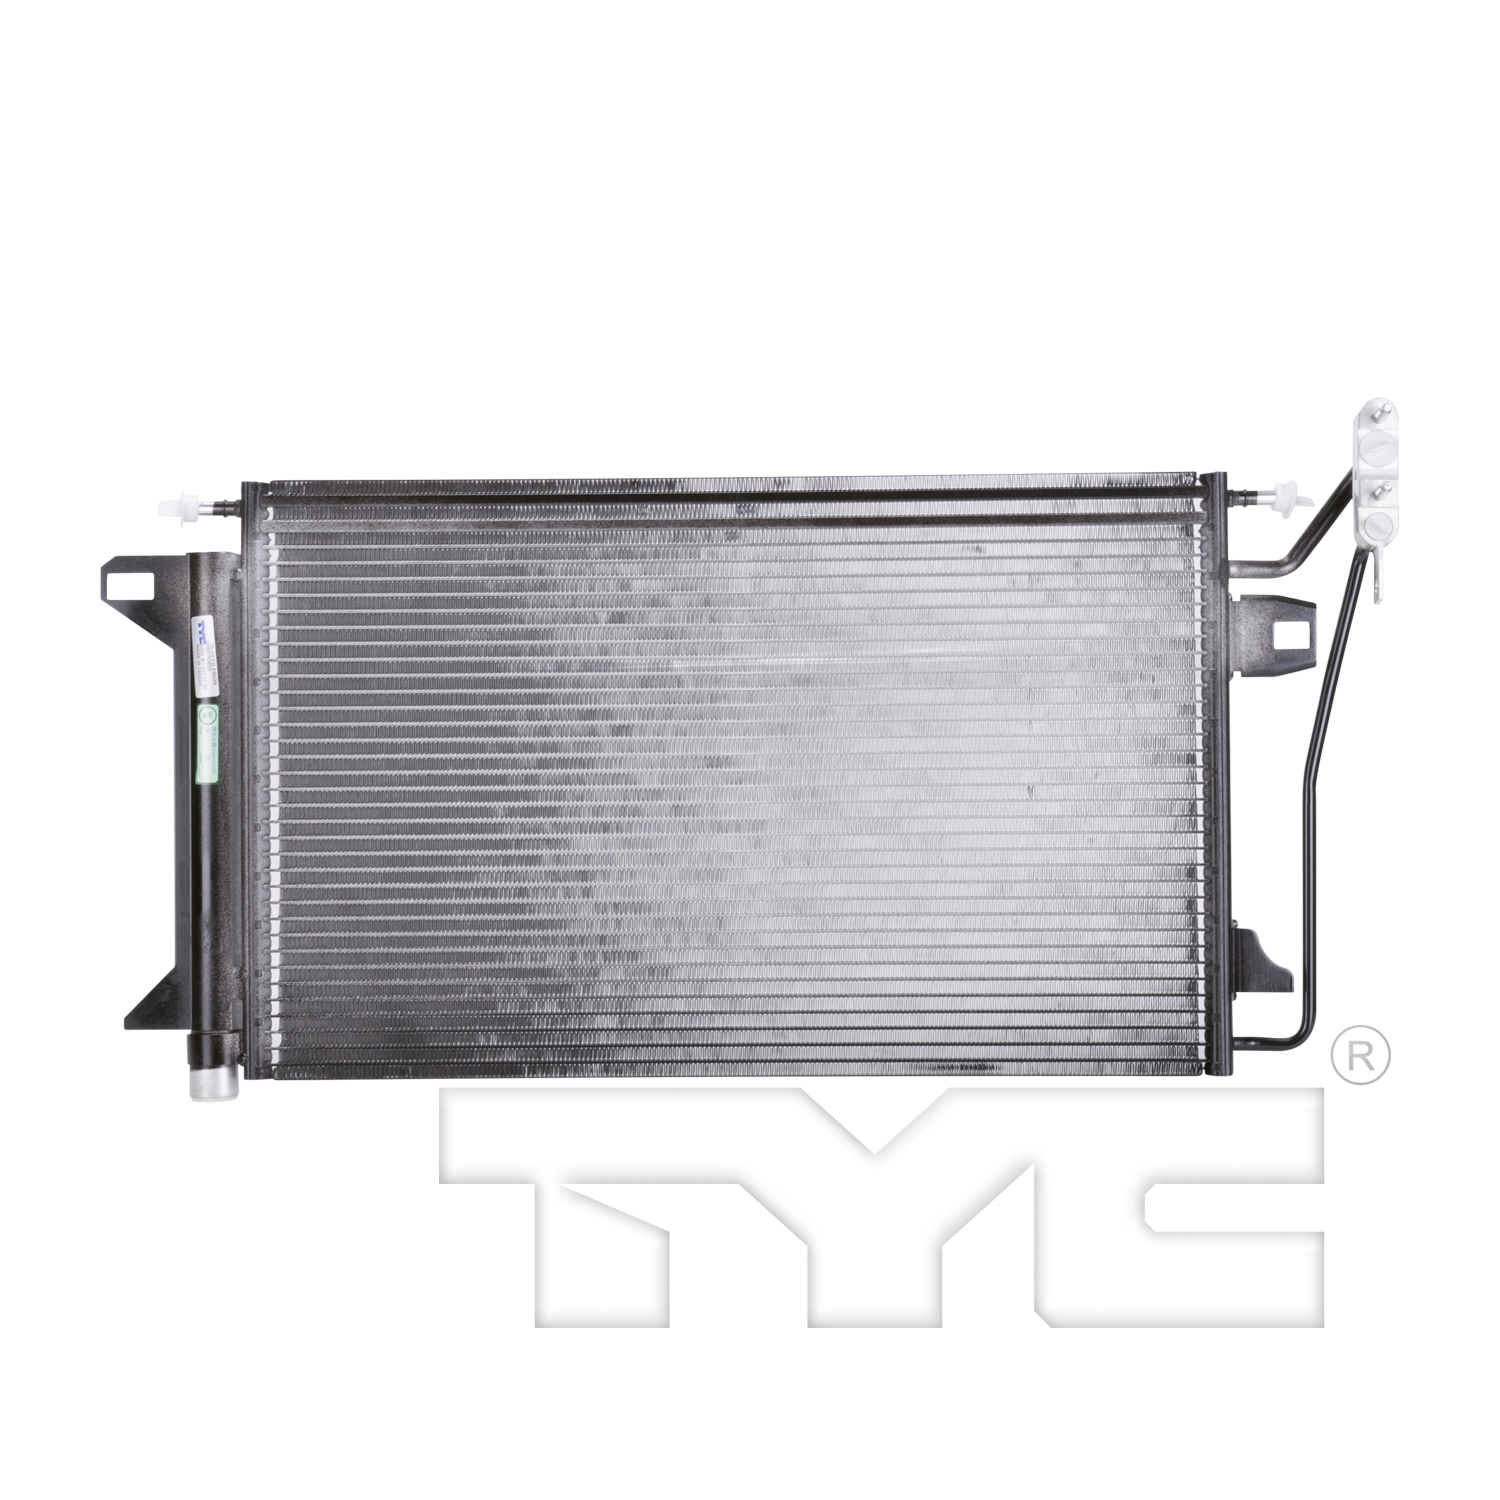 Aftermarket AC CONDENSERS for LINCOLN - ZEPHYR, ZEPHYR,06-06,Air conditioning condenser